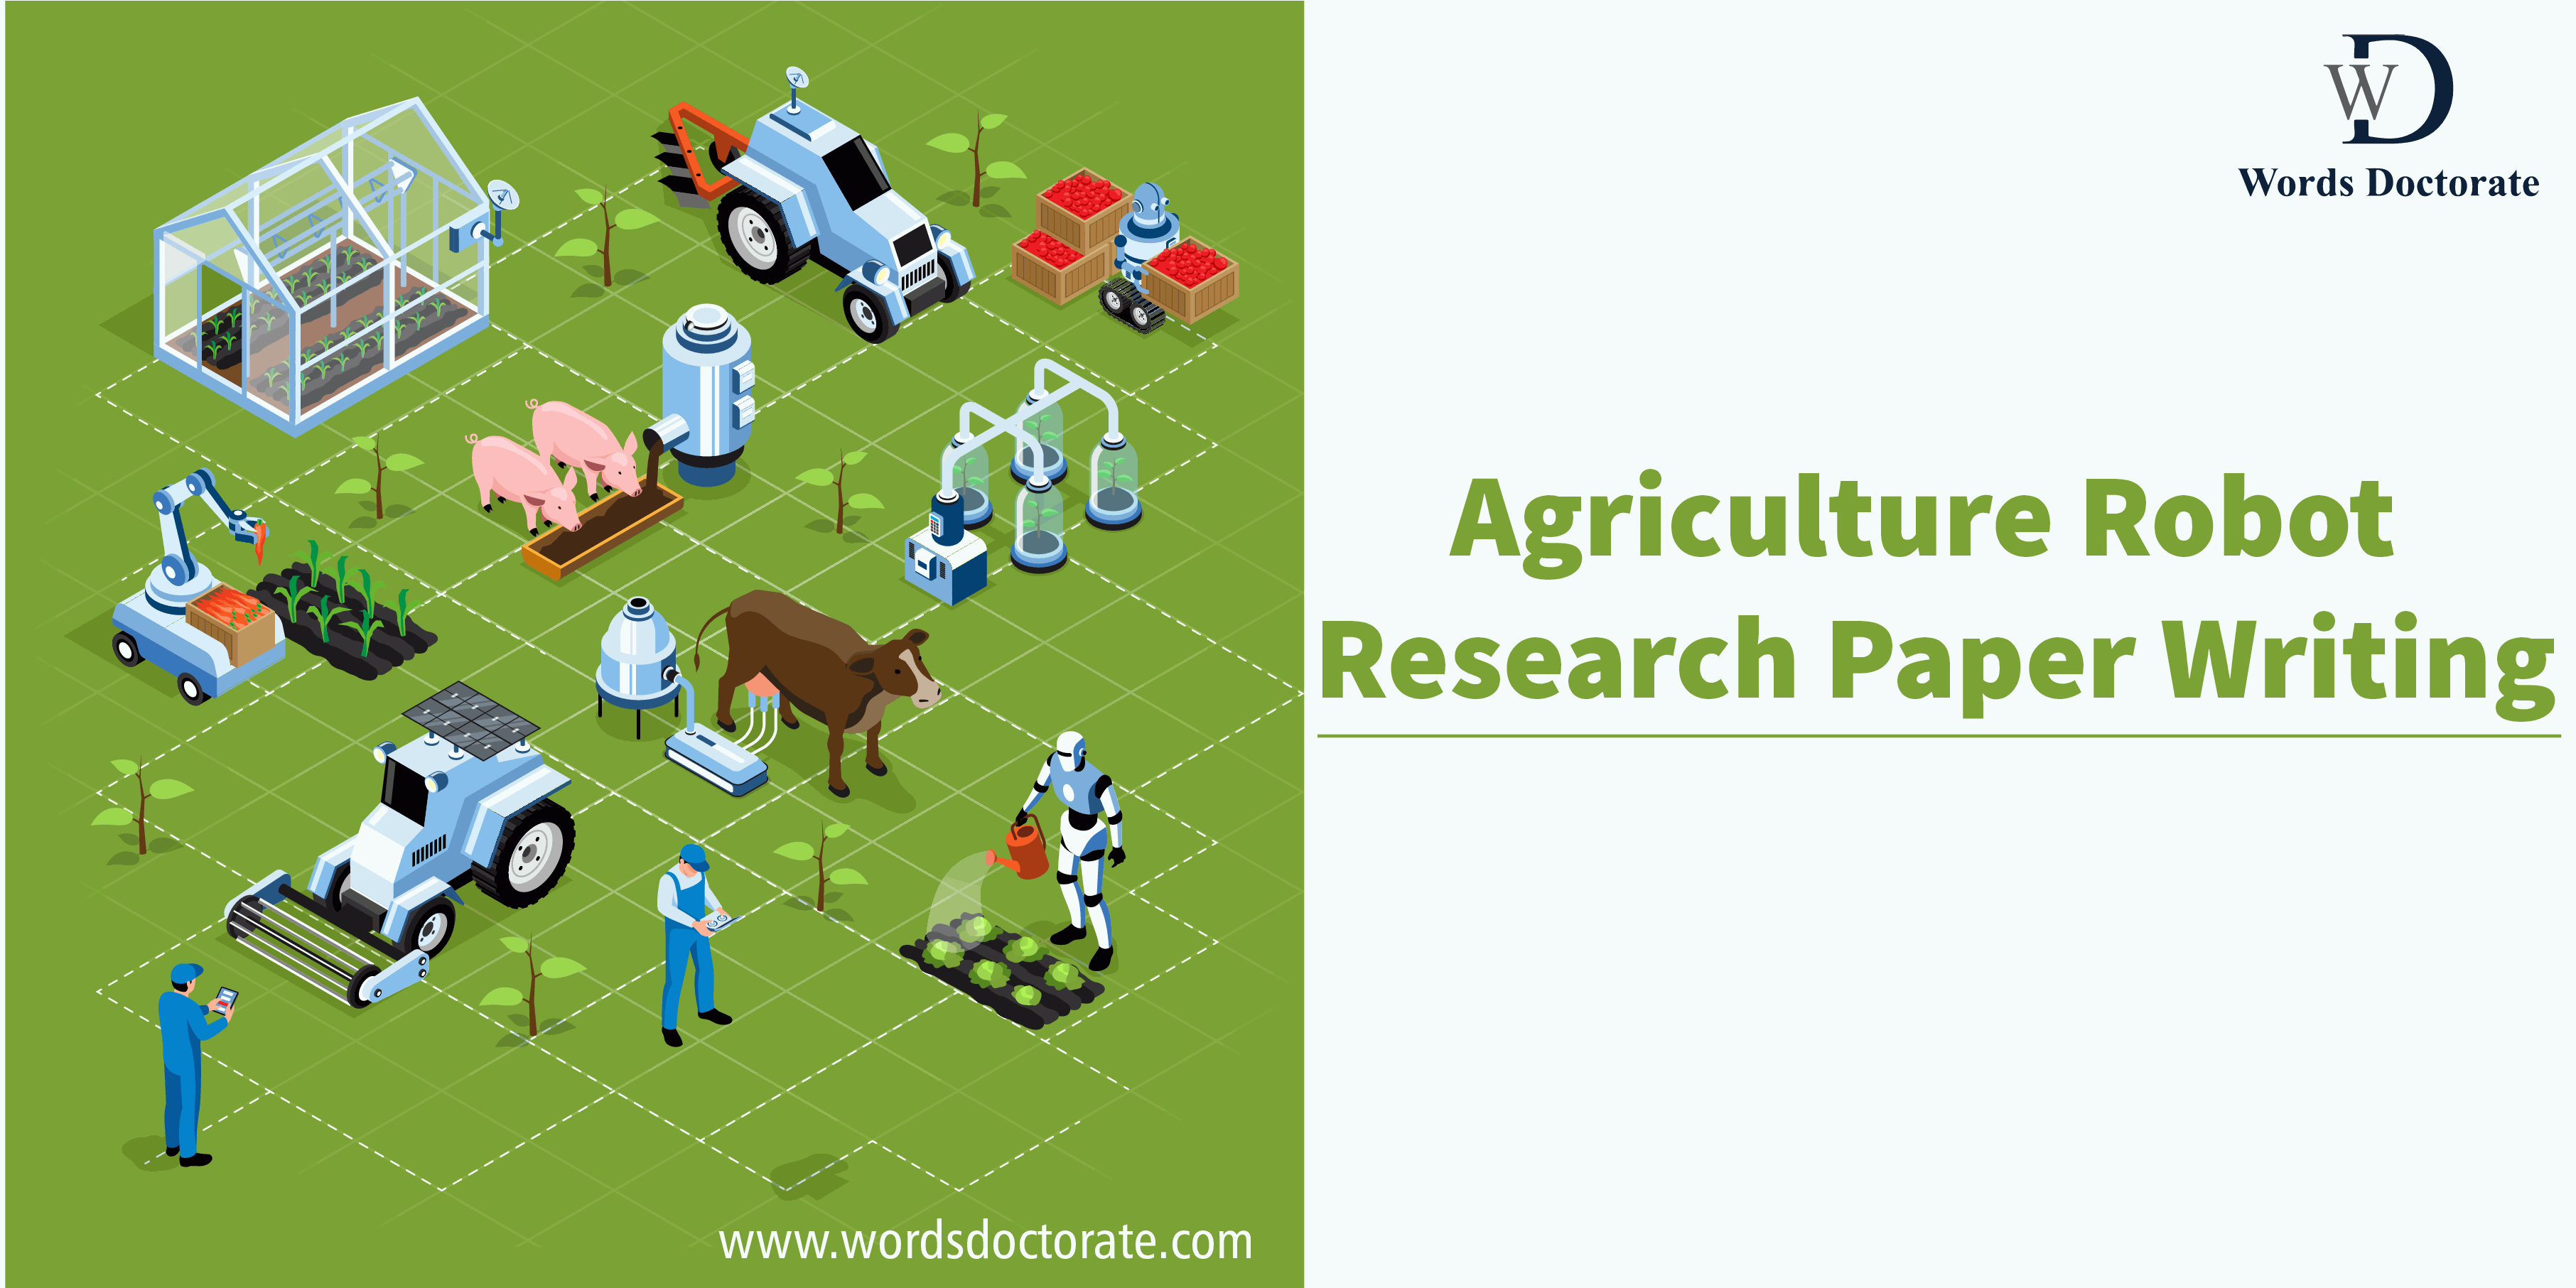 Agriculture Robot Research Paper Writing